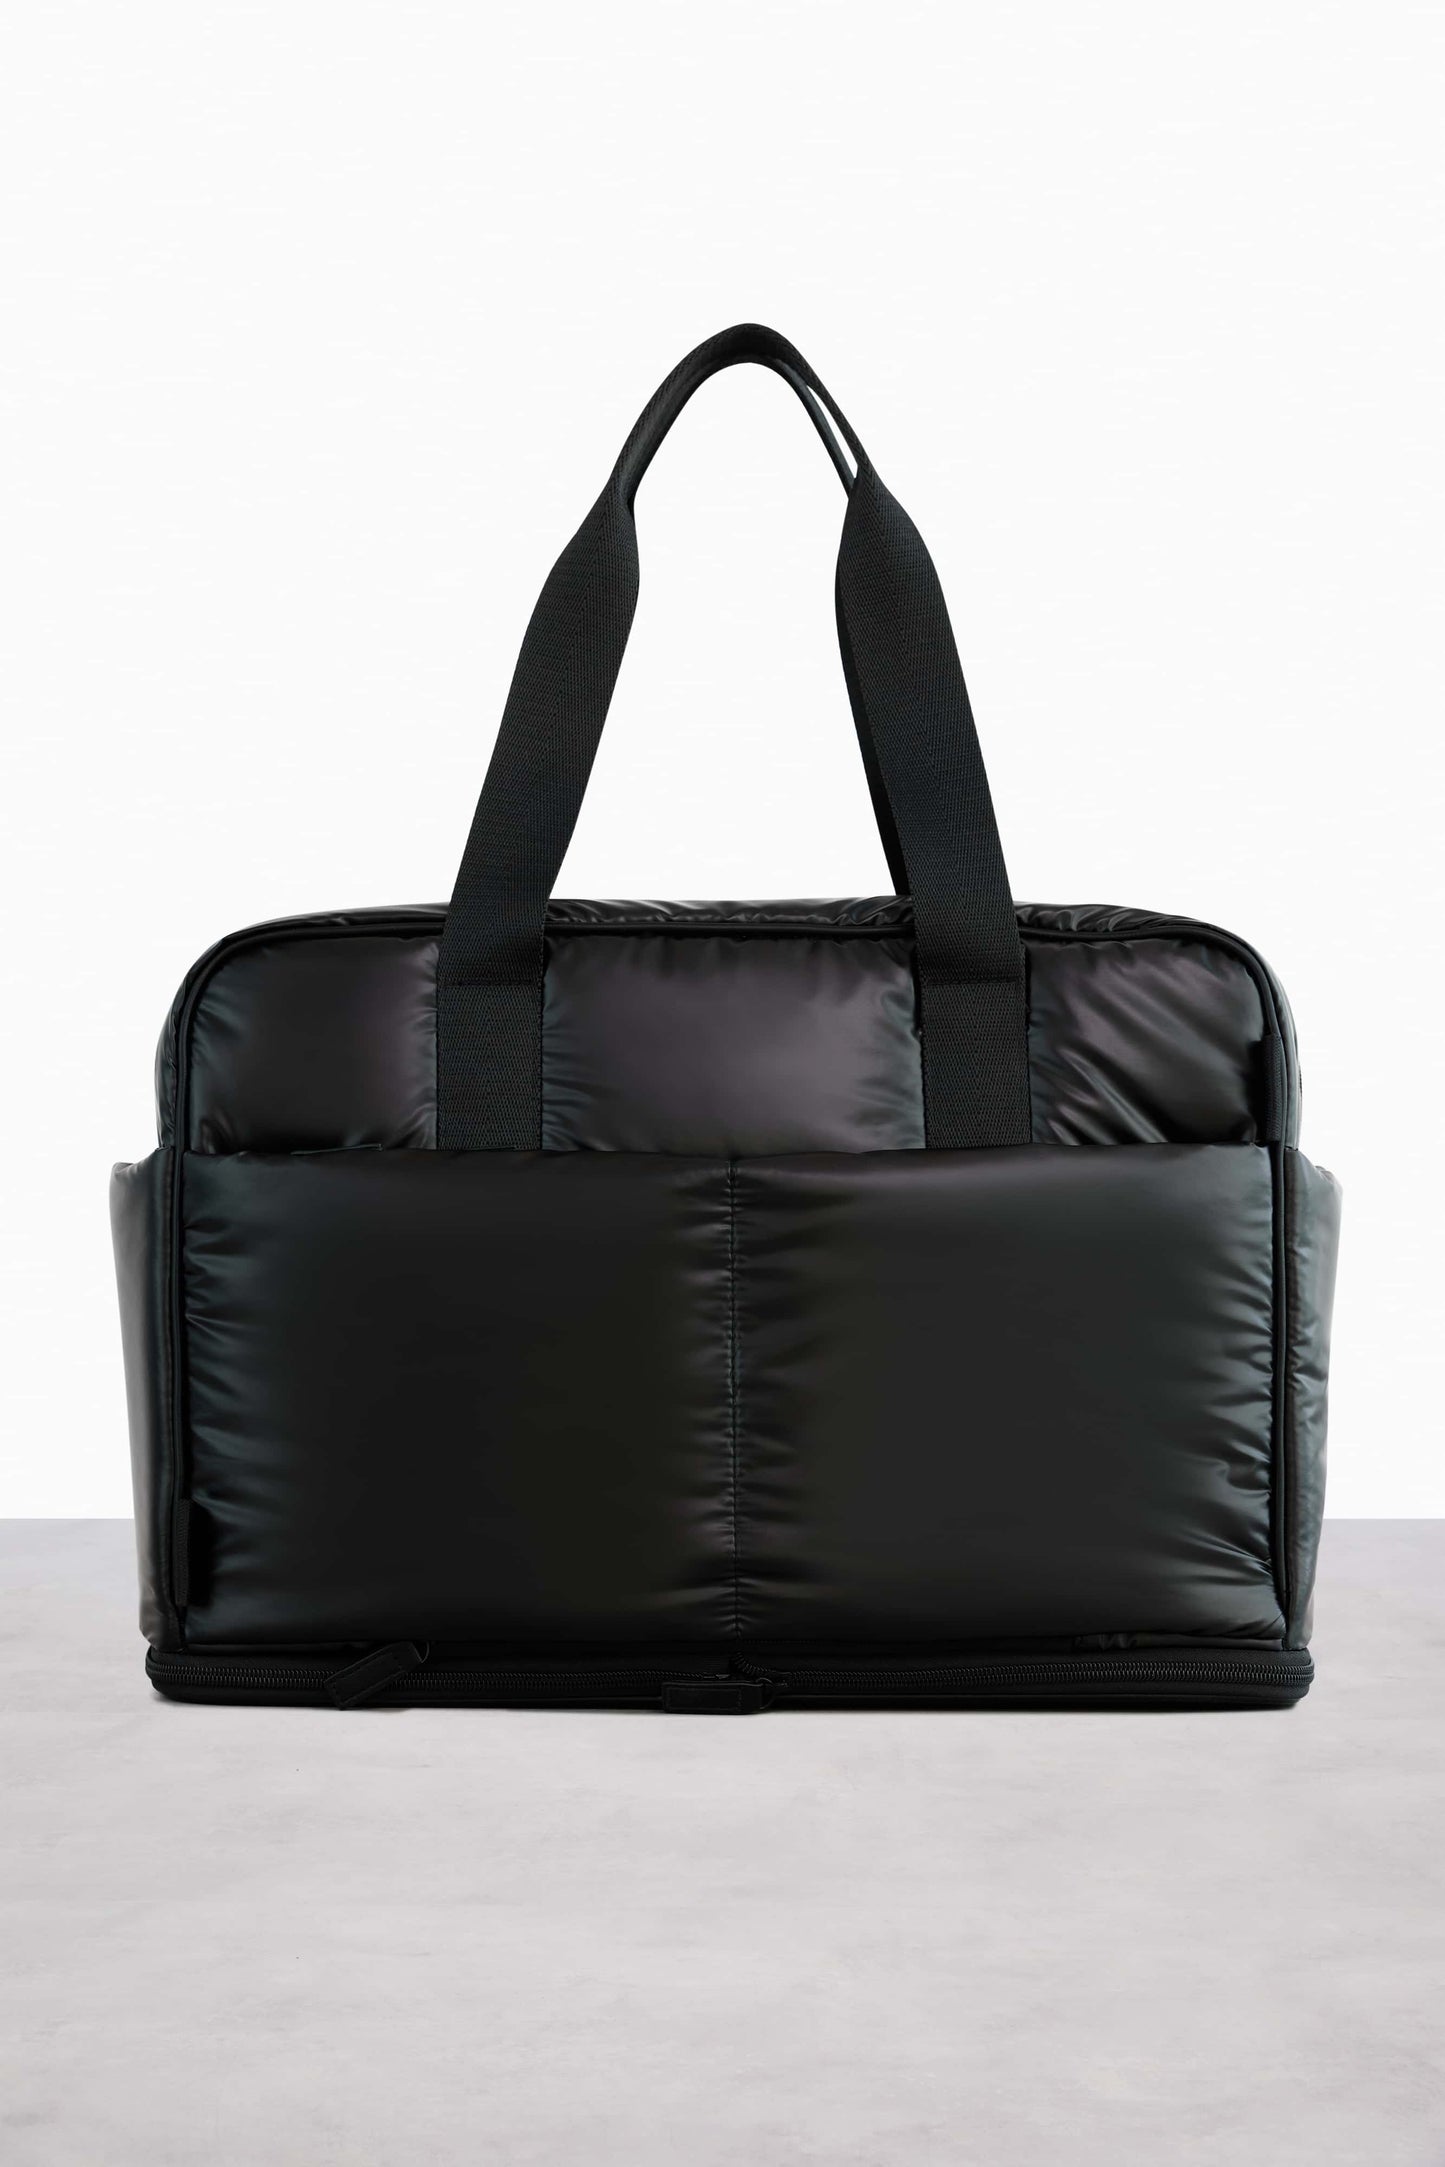 The Expandable Duffle in Black